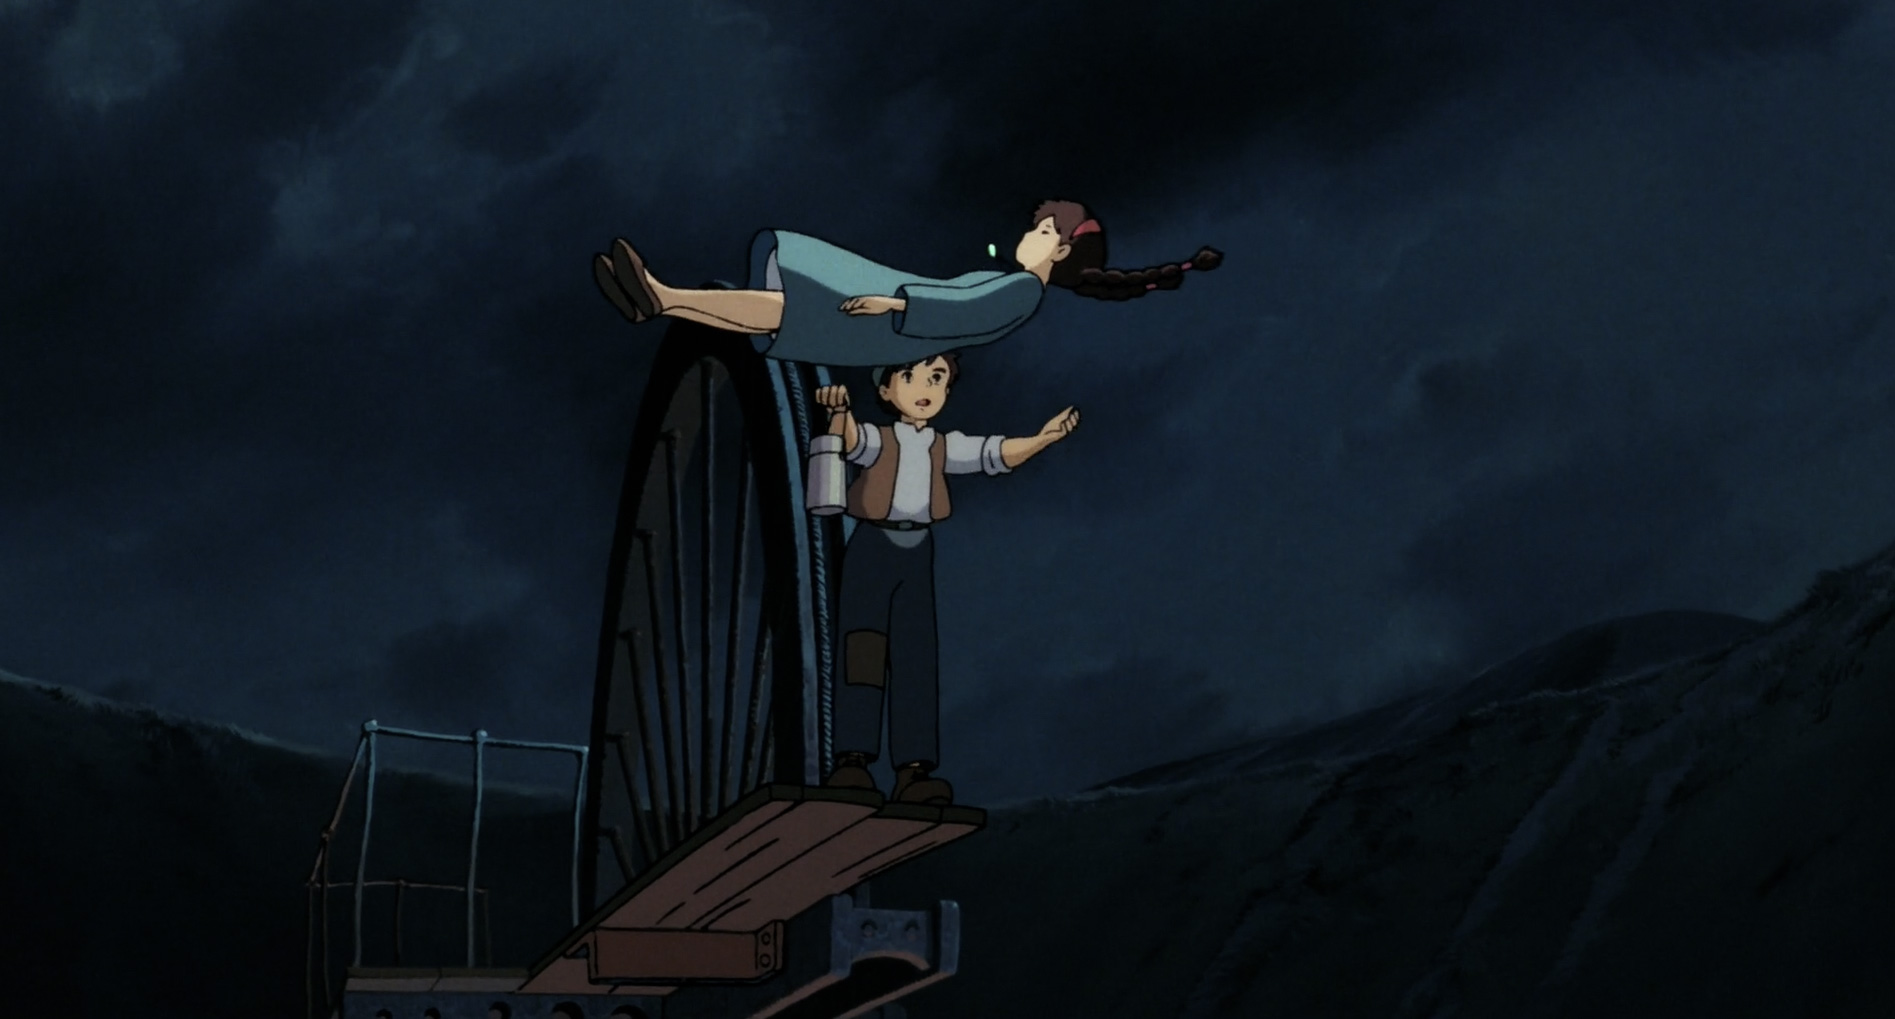 Pazu catches Sheeta as she floats down from the sky in the 1986 movie Castle in the Sky, written and directed by Hayao Miyazaki